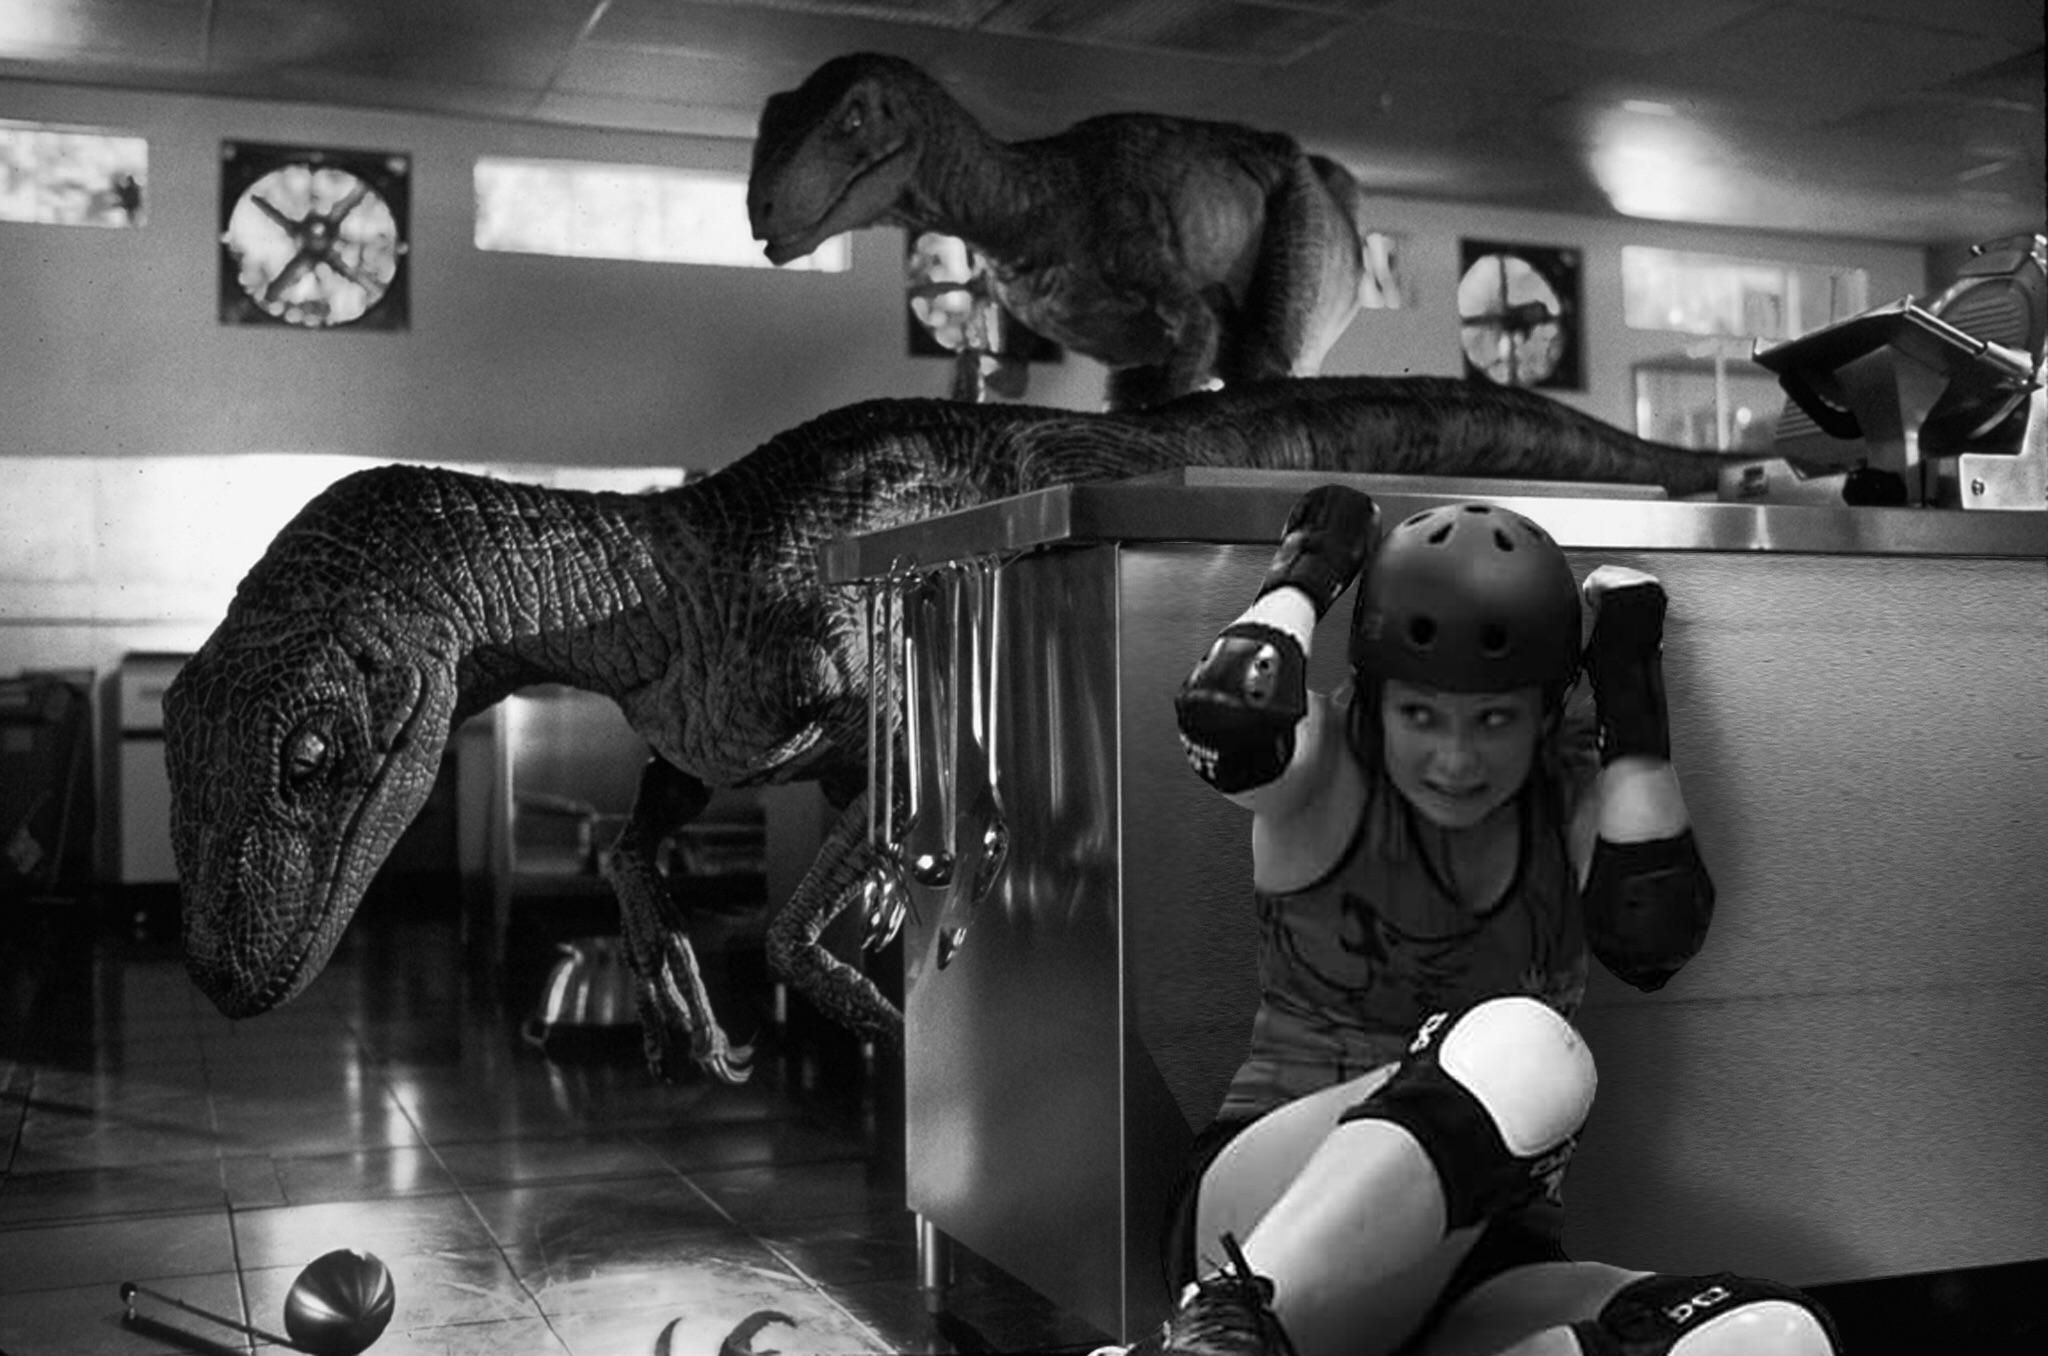 My friend plays roller derby. A photographer caught an interesting picture of her during a championship game and I felt it needed more dinosaurs...